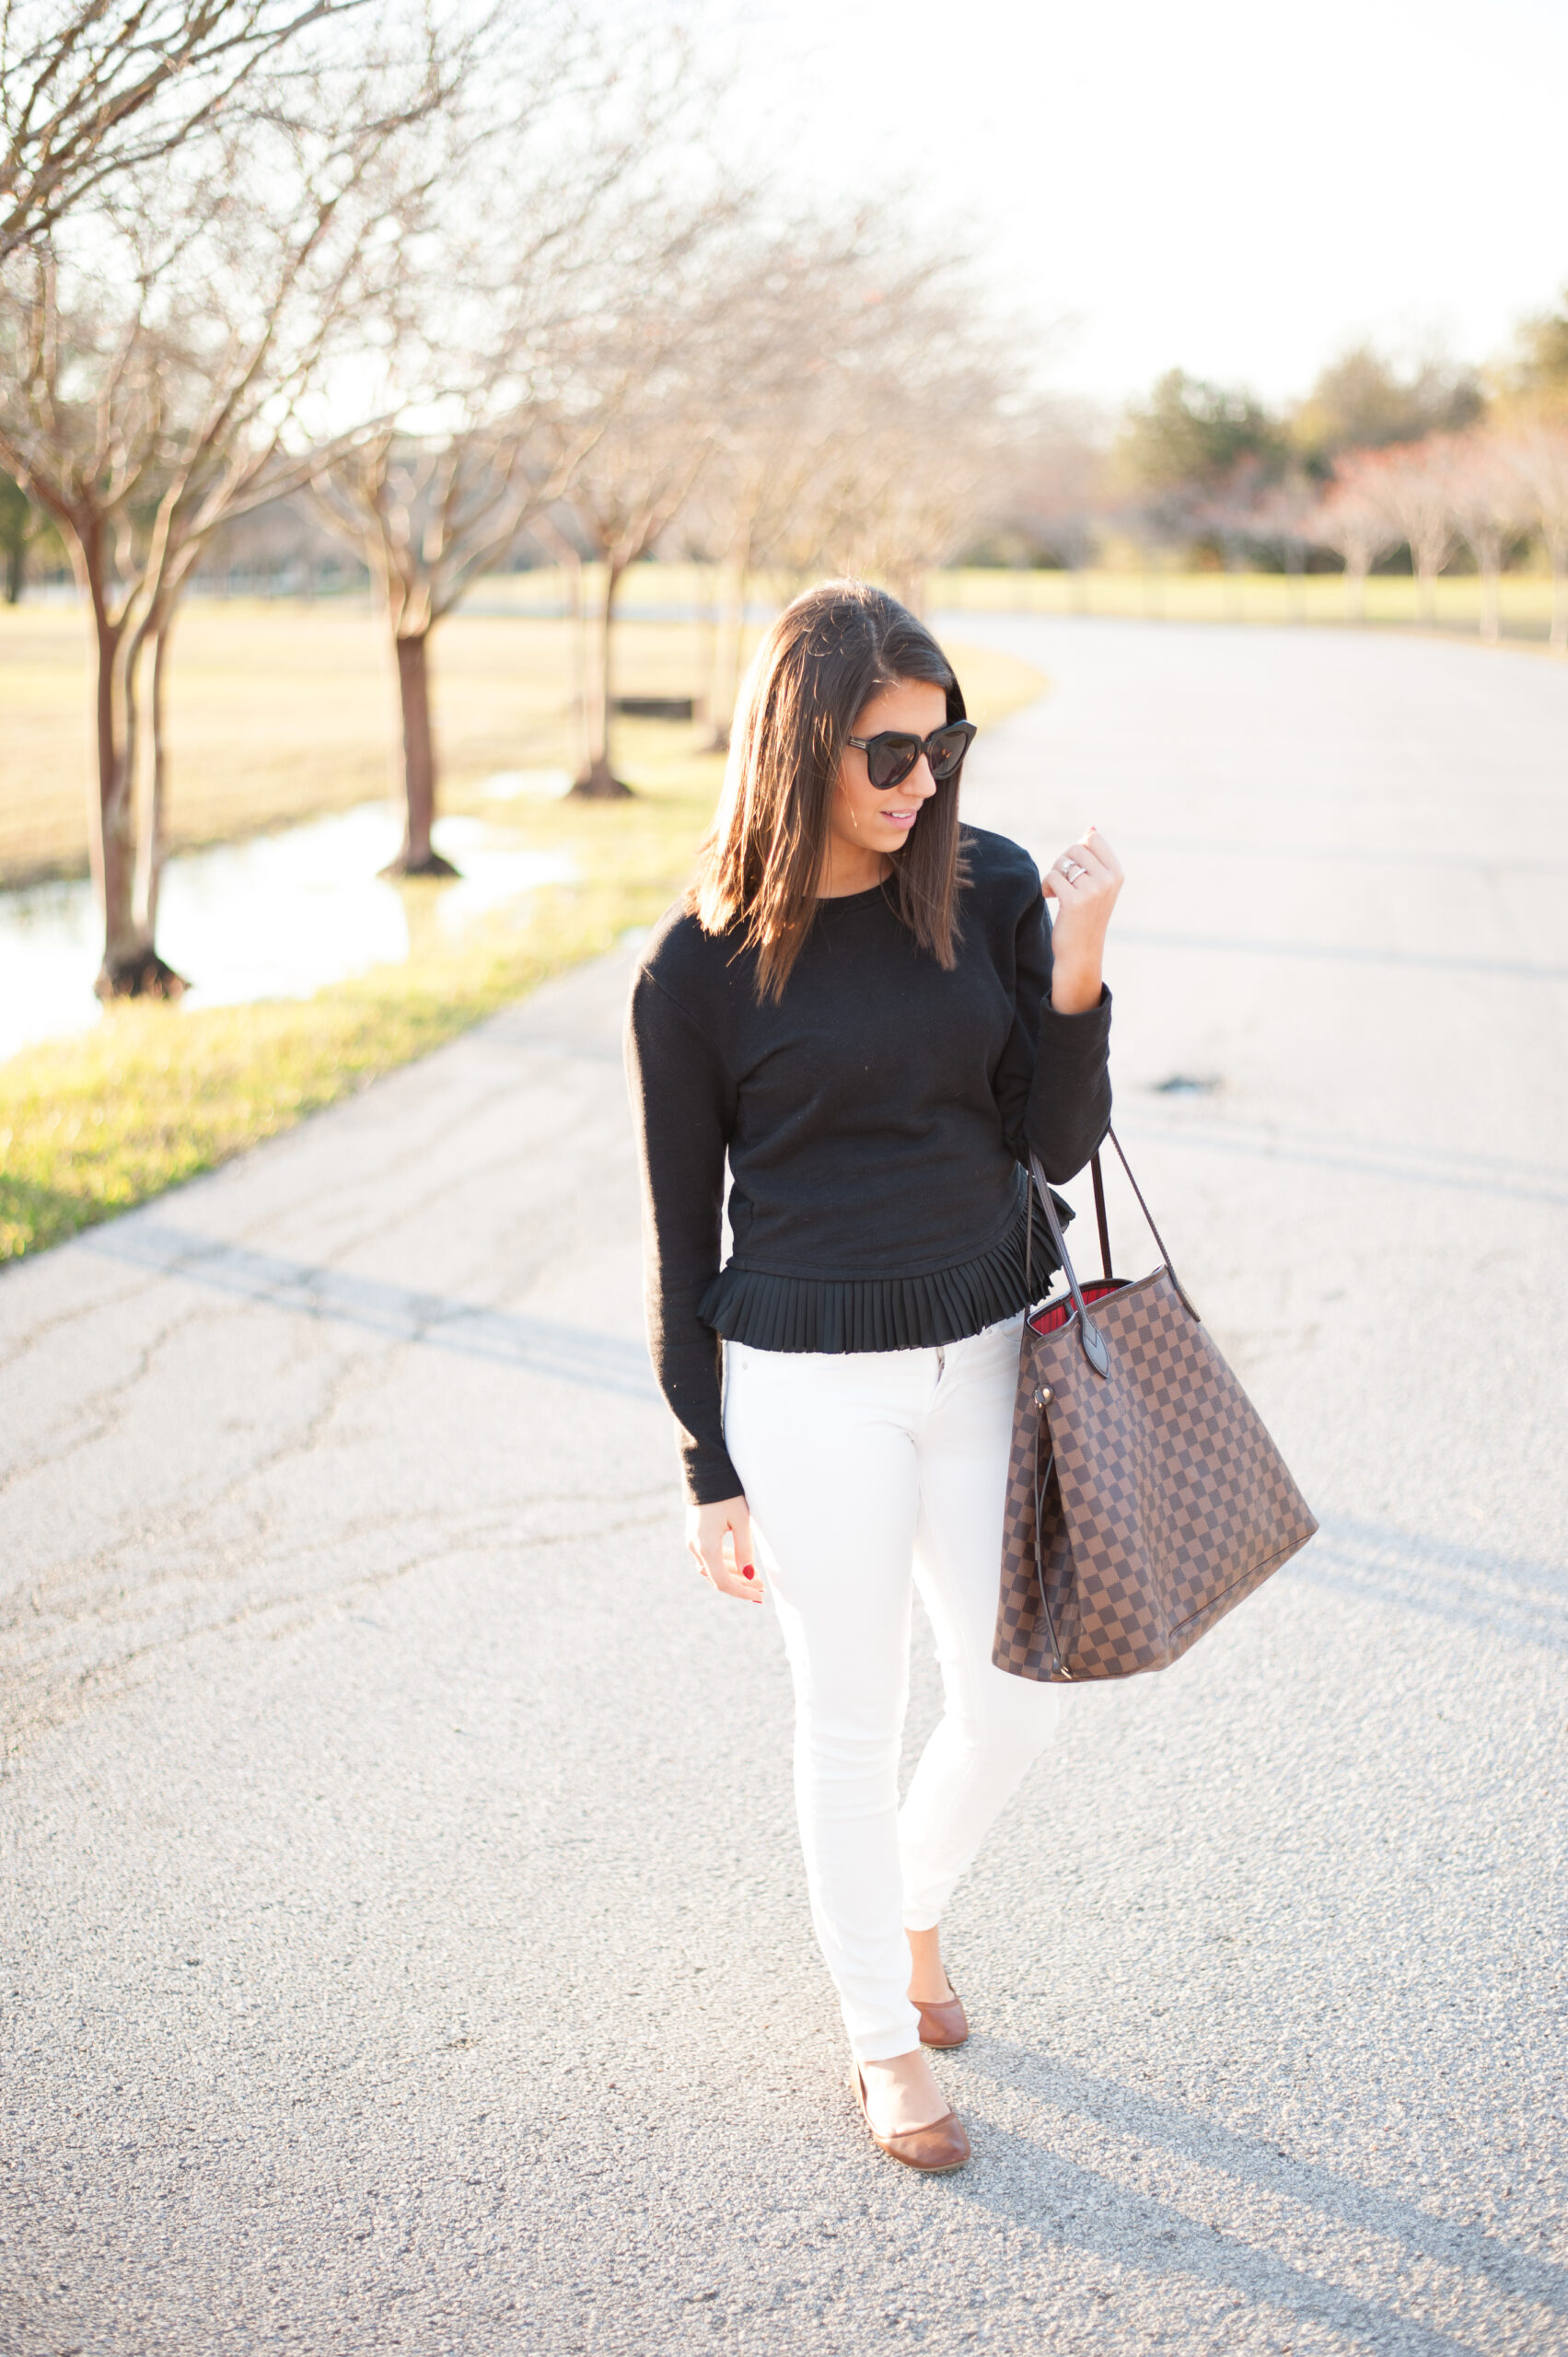 dress_up_buttercup_dede_raad_fashion_blogger_houston (4 of 8)